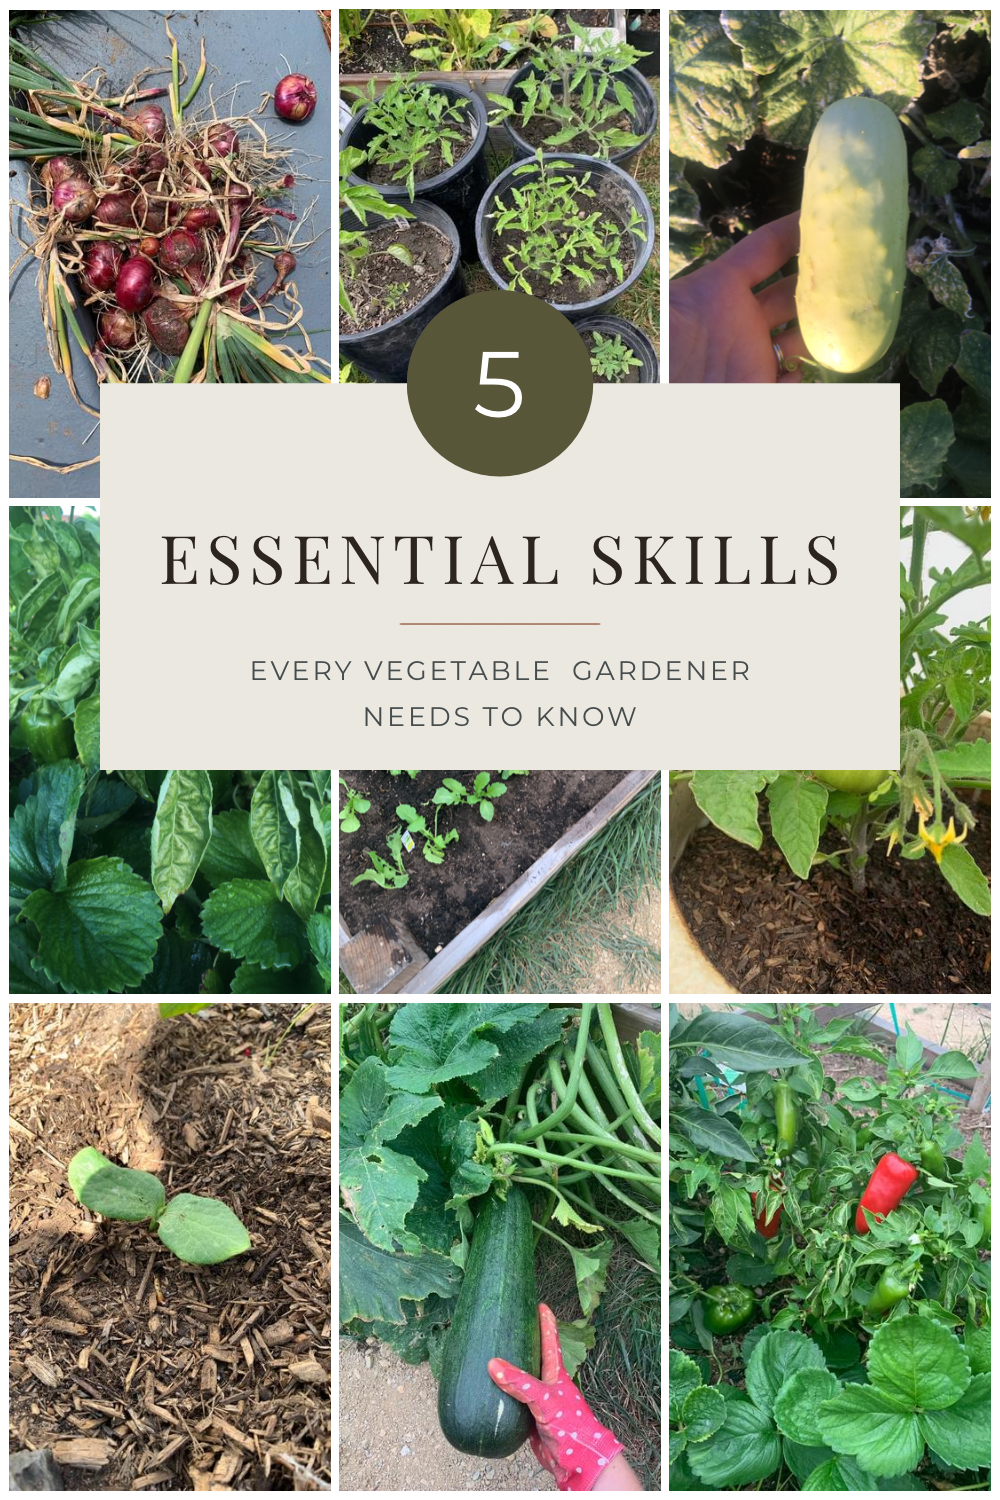 5 essential skills every vegetable gardener needs to know